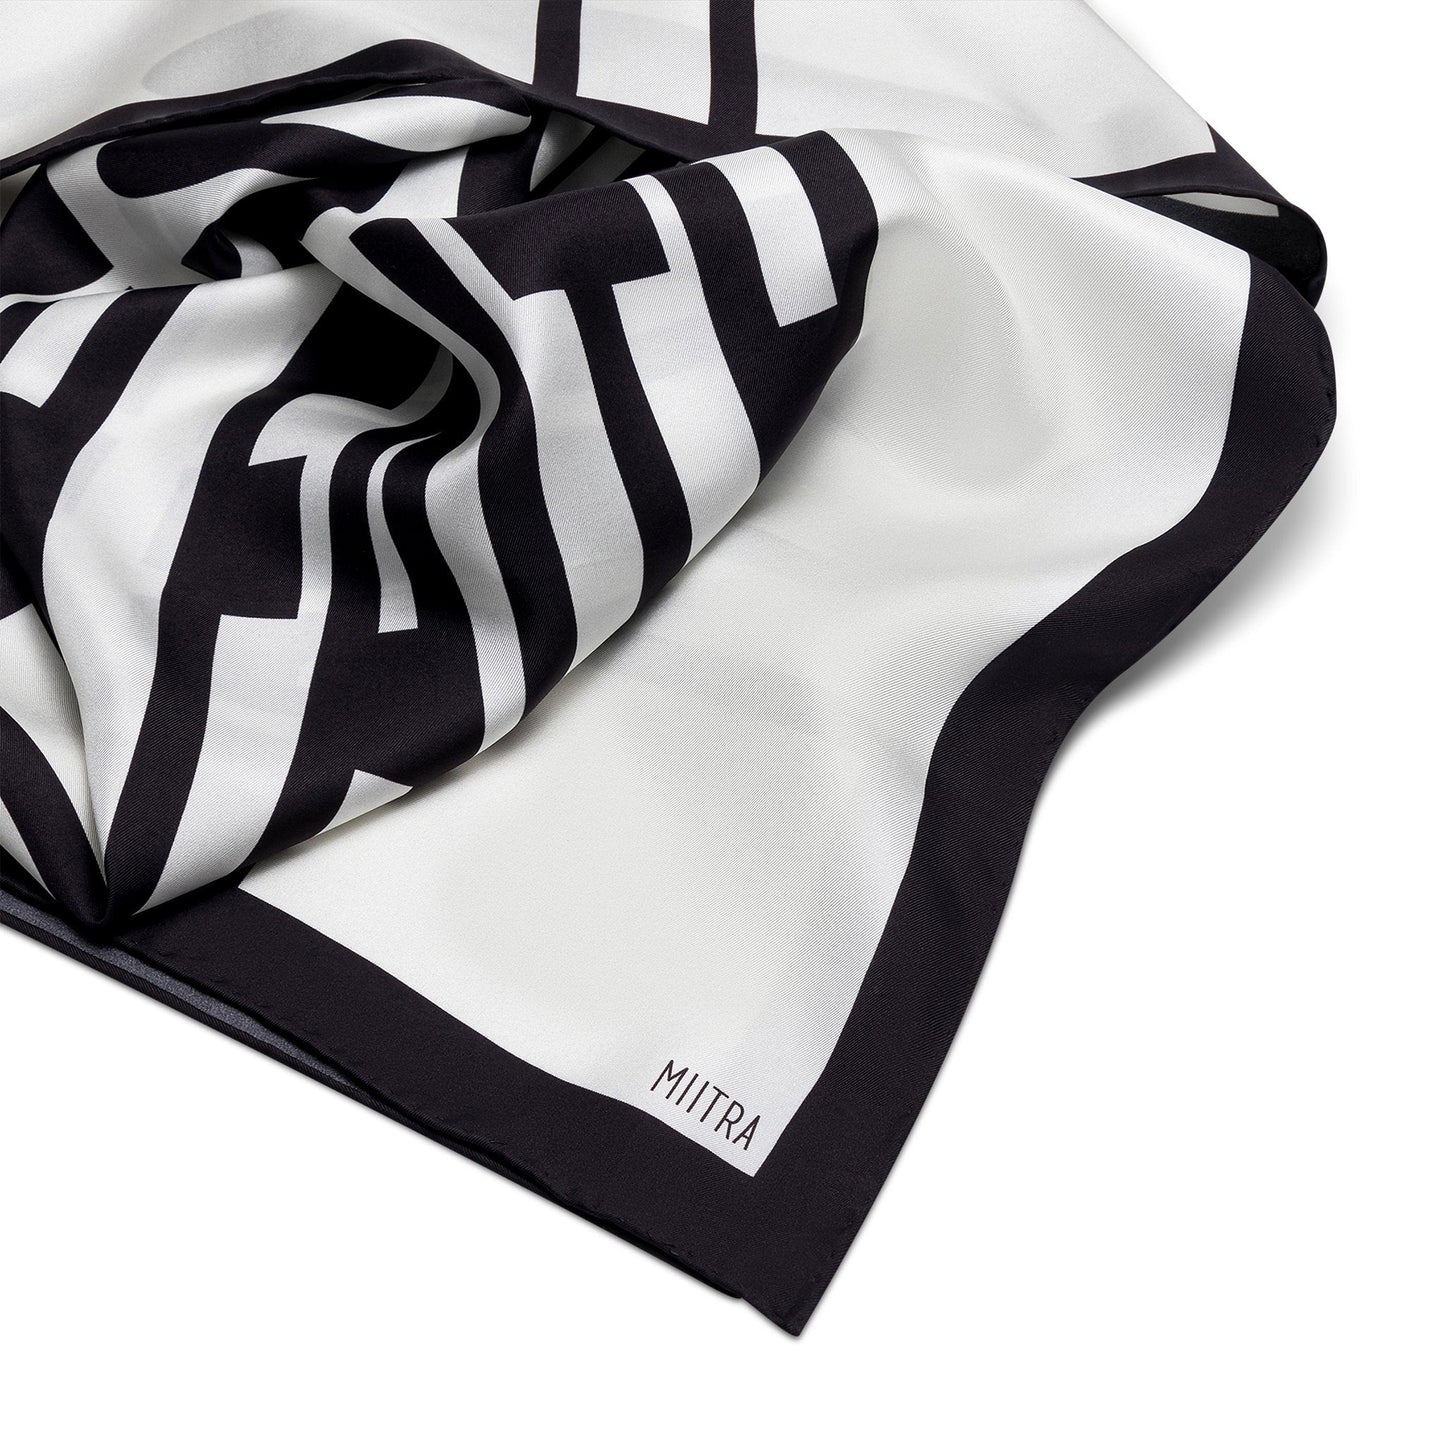 Liberation Silk Scarf - detail shot of ivory and black silk scarf with close up of branding